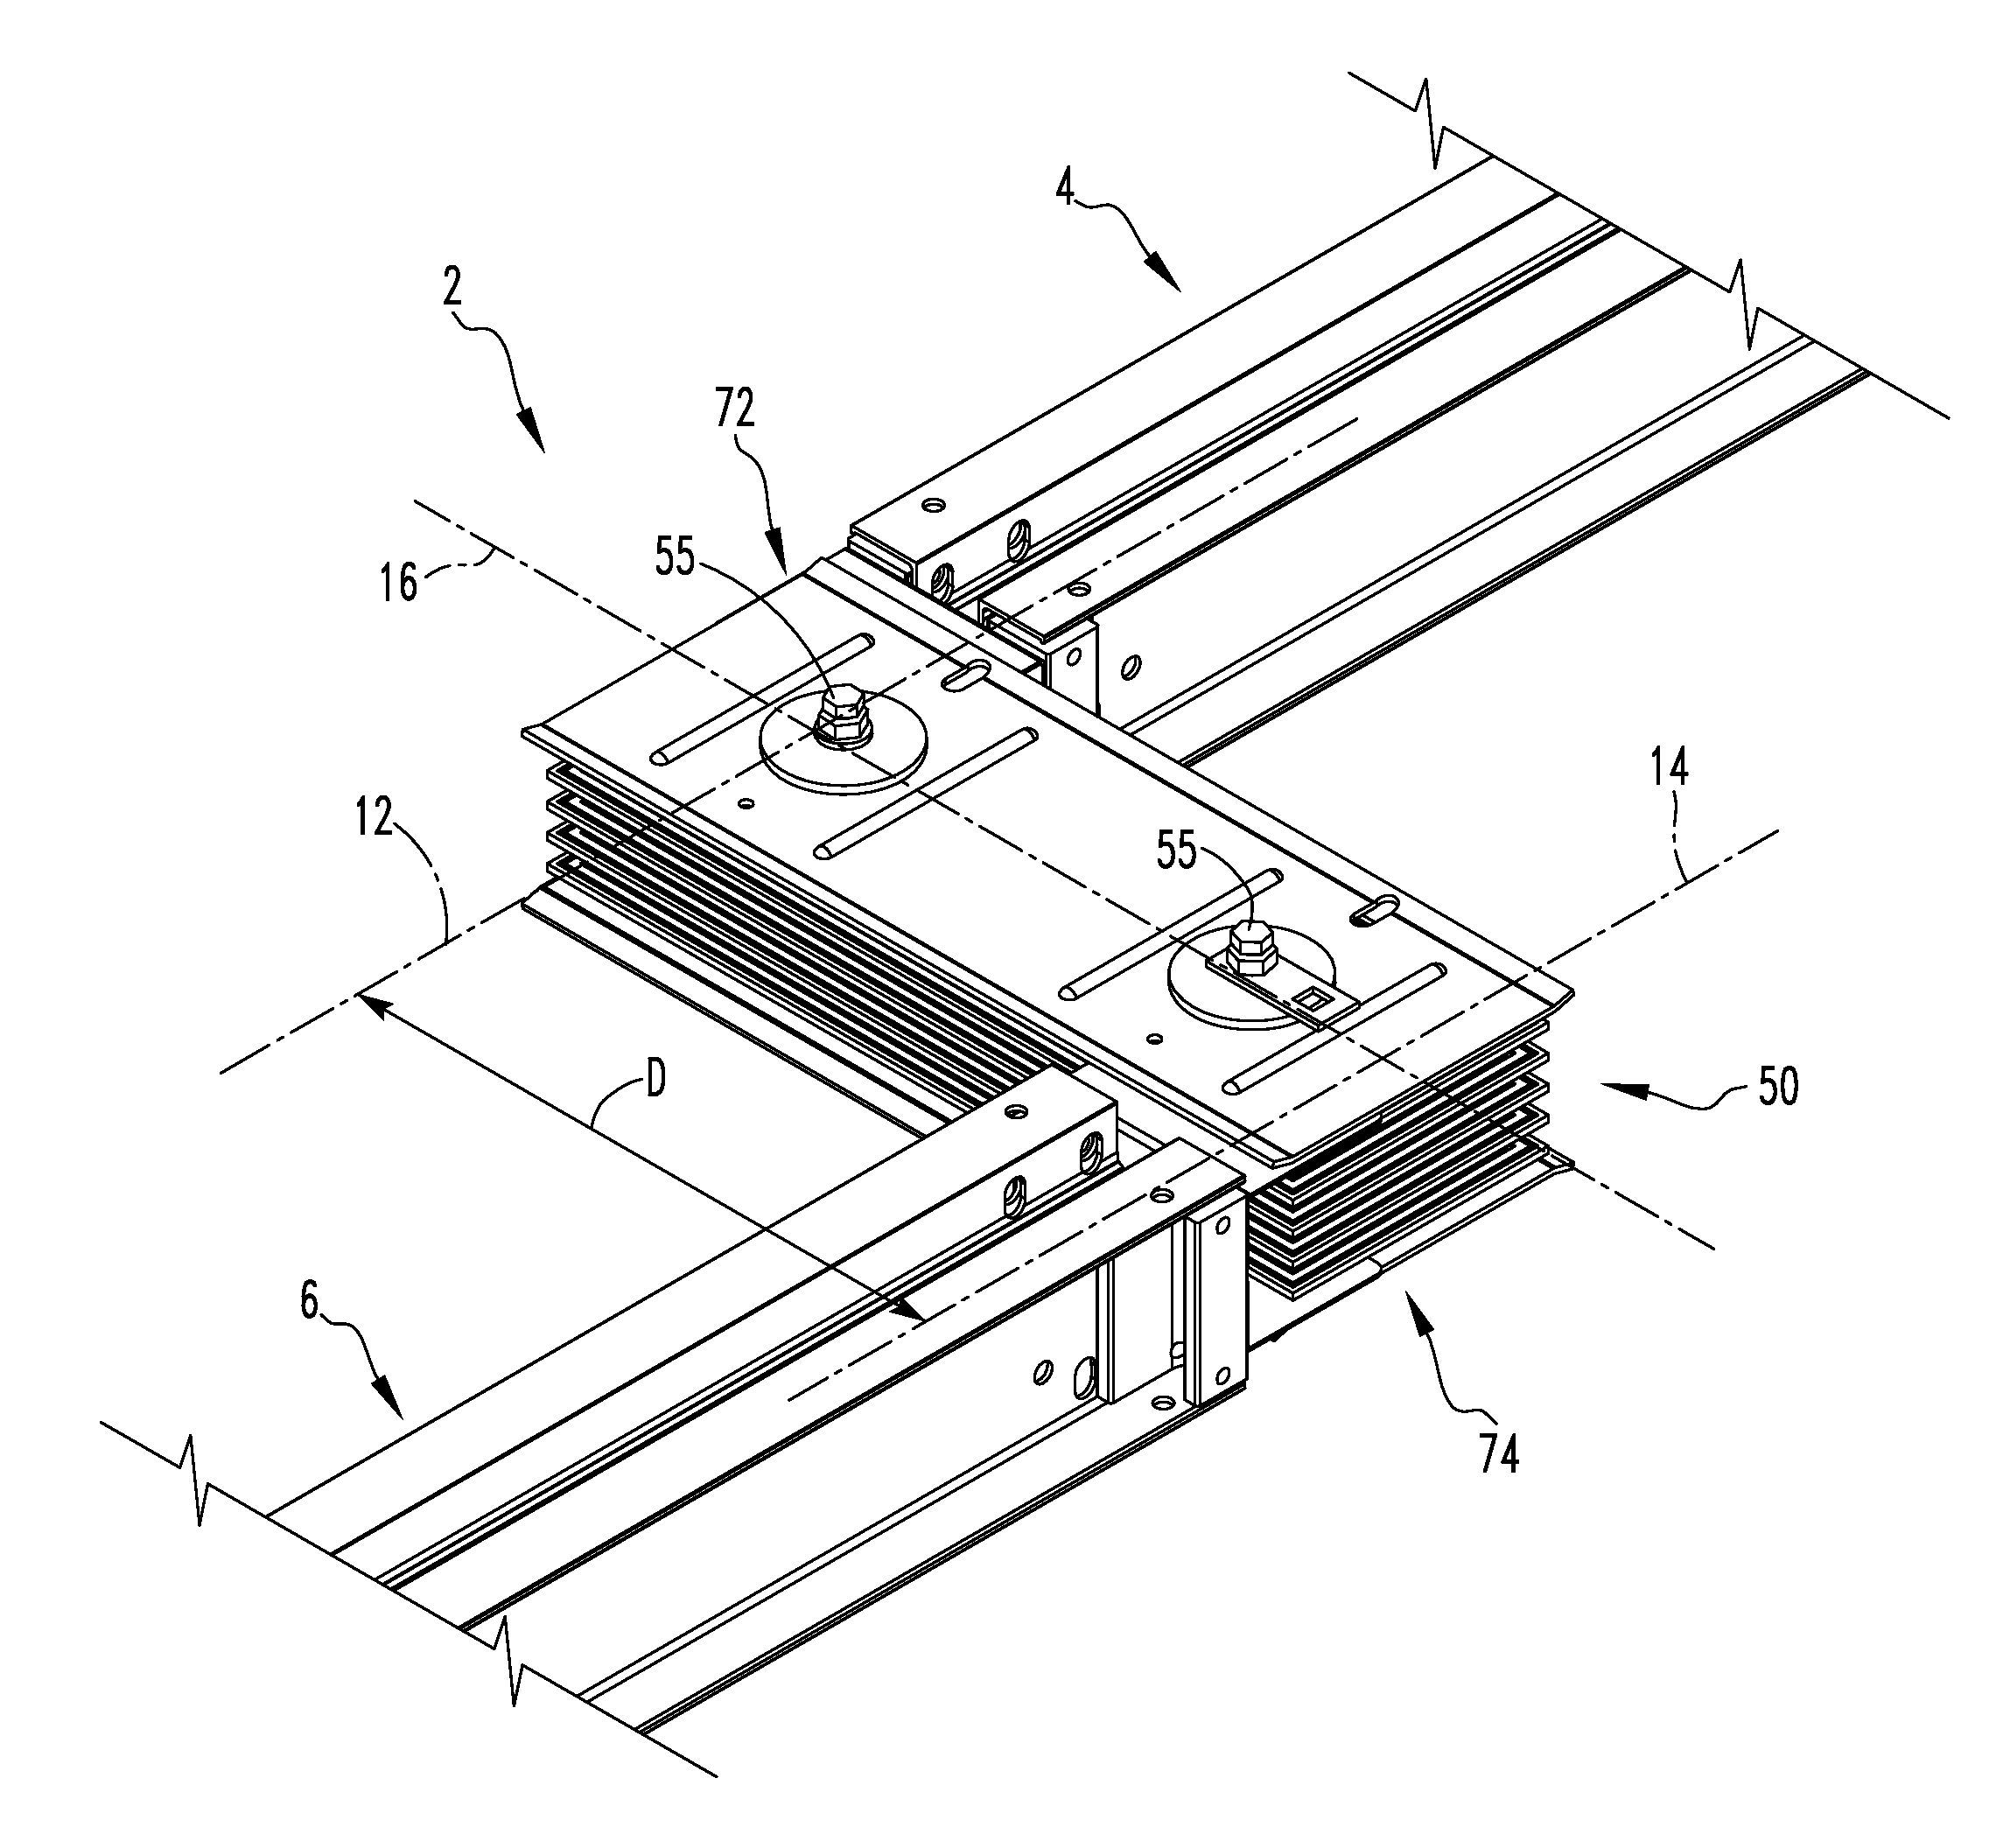 Electrical busway and offset coupling assembly therefor